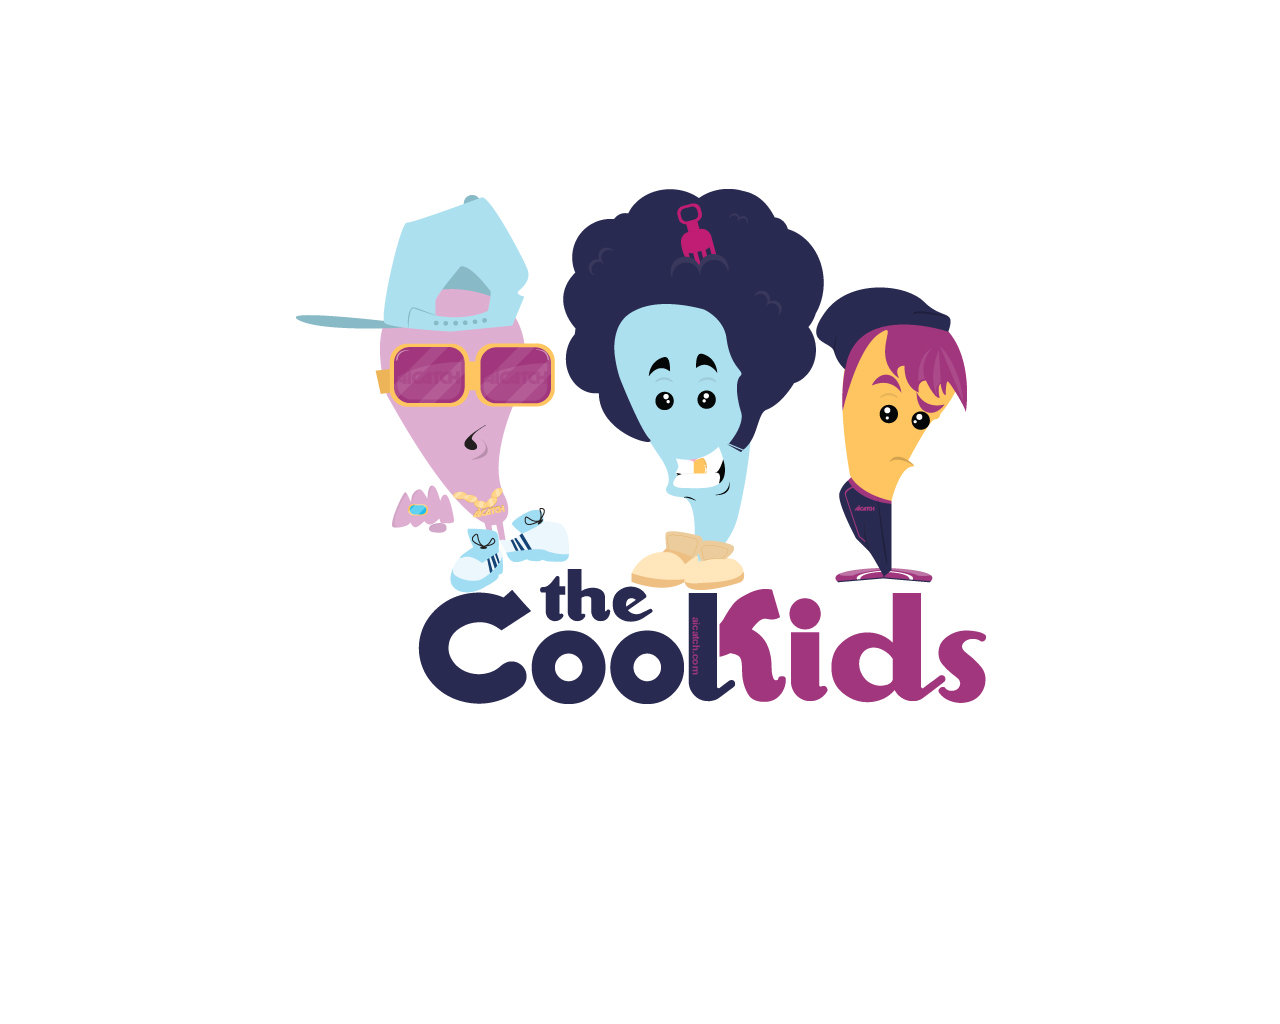 the Cool Kids by Msch on